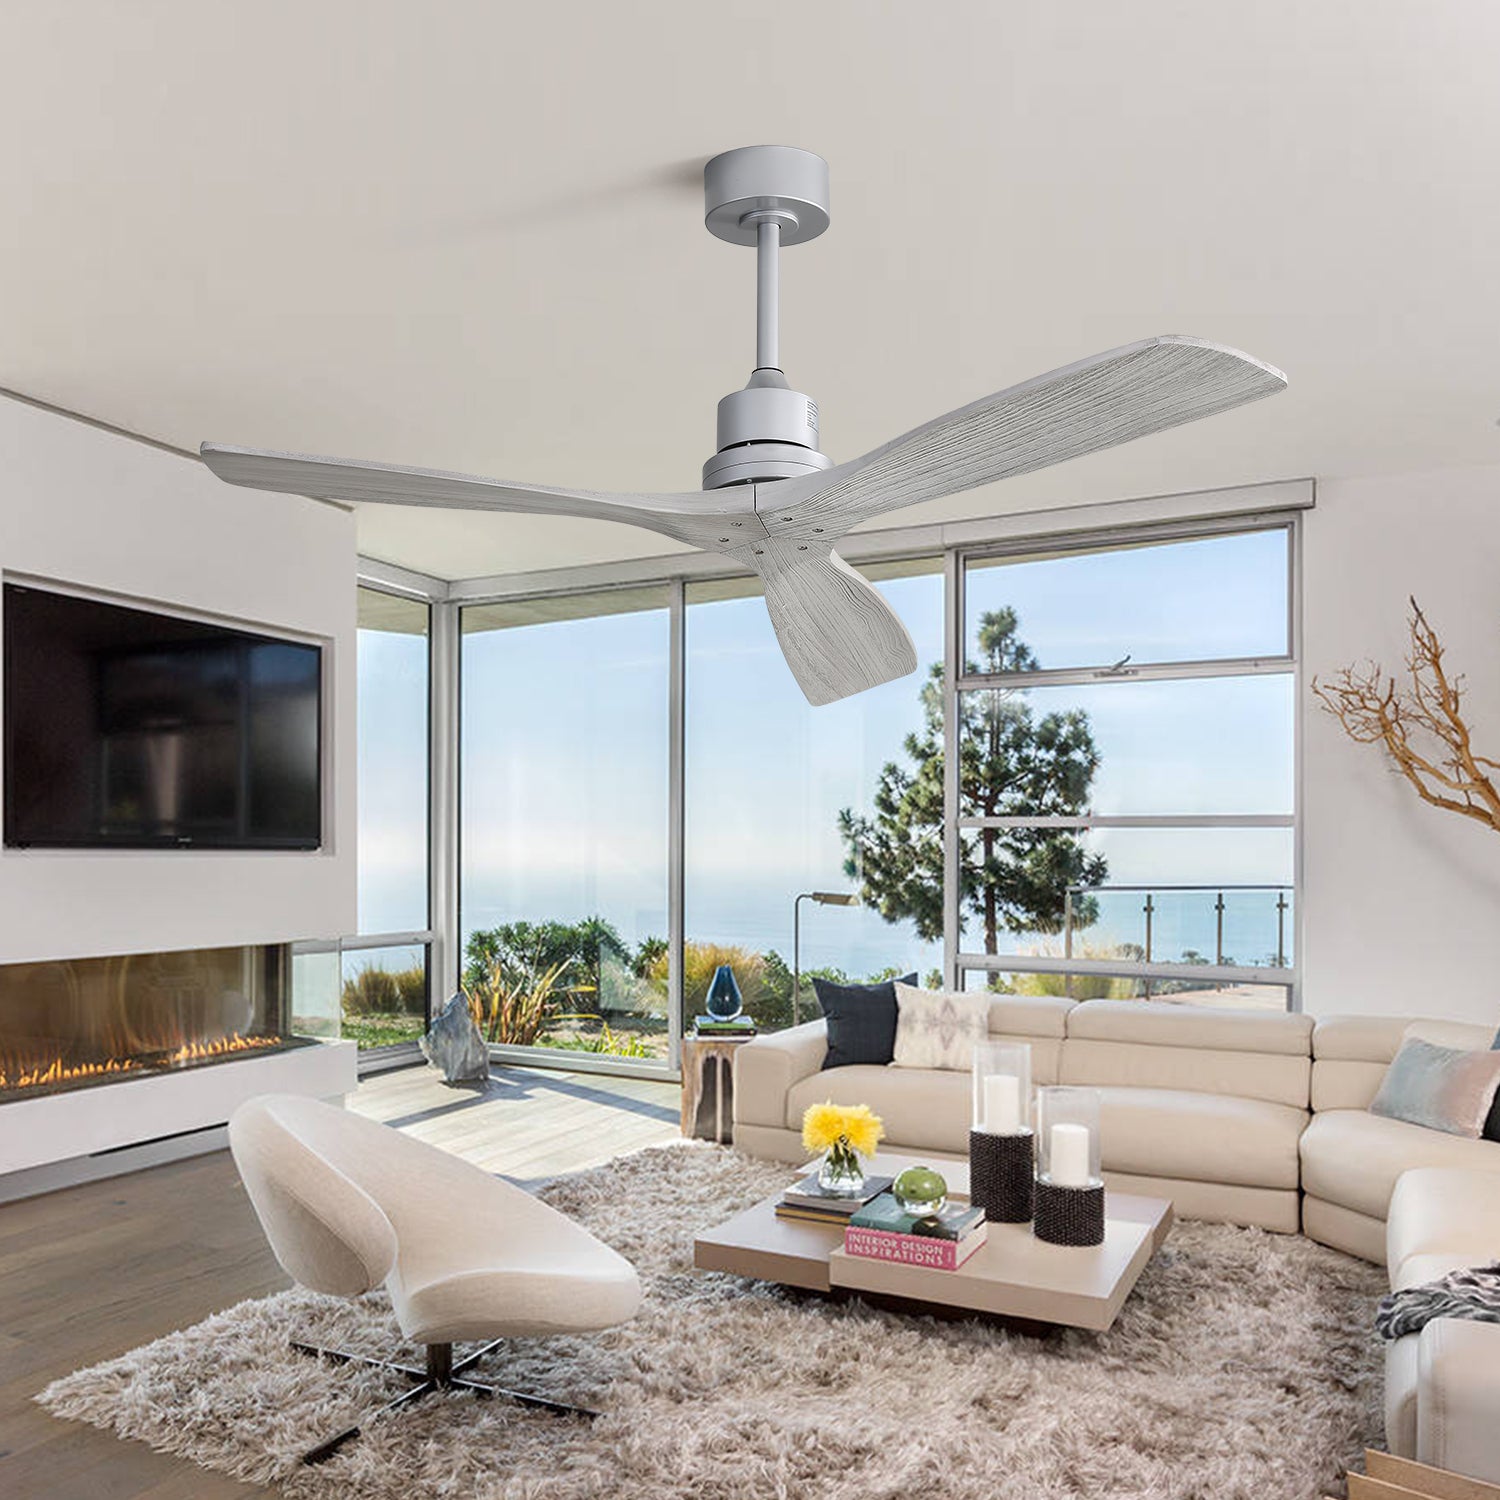 Indoor 52inch Ceiling Fan with Remote Control Solid silver-metal & wood